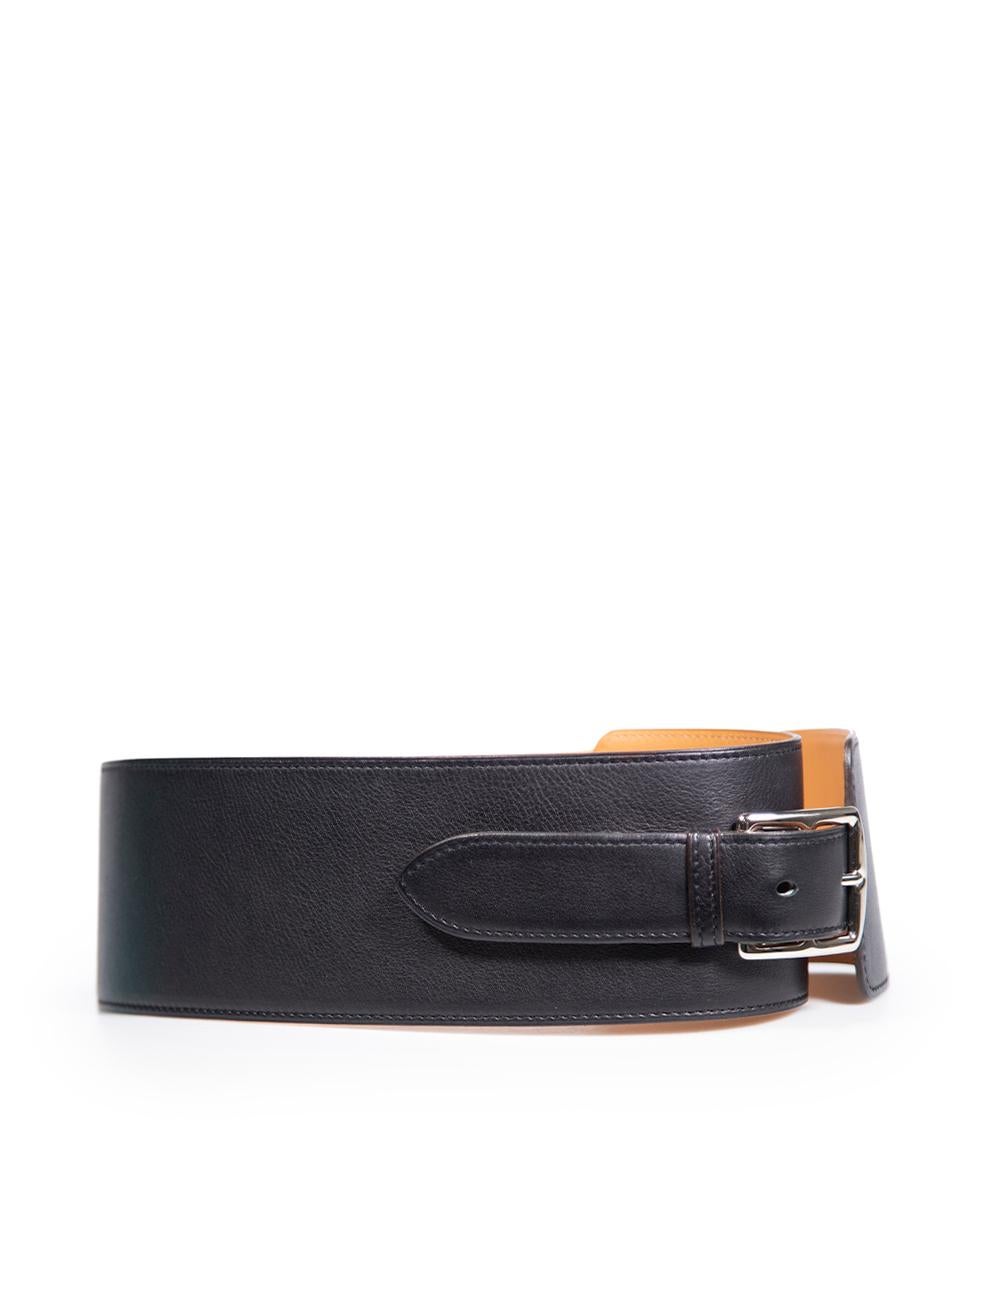 CONDITION is Very good. Minimal wear to belt is evident. Minimal wear to the underside with discoloured marks on this used Hermès designer resale item.
  
Details
Etriviere
Black
Leather
Wide waist belt
Silver plated palladium hardware
Buckle